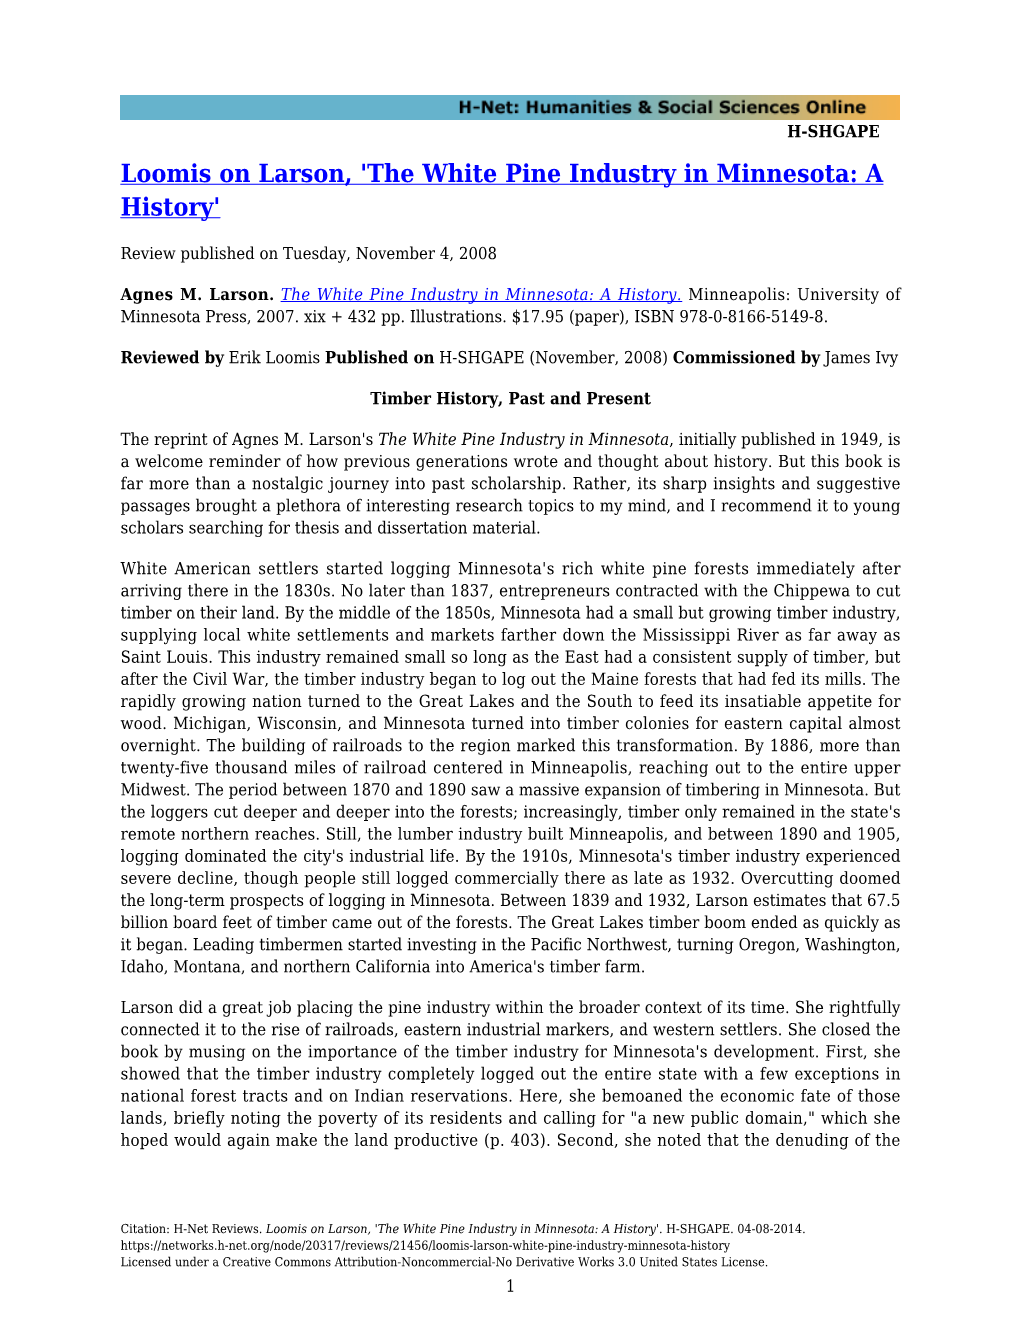 Loomis on Larson, 'The White Pine Industry in Minnesota: a History'